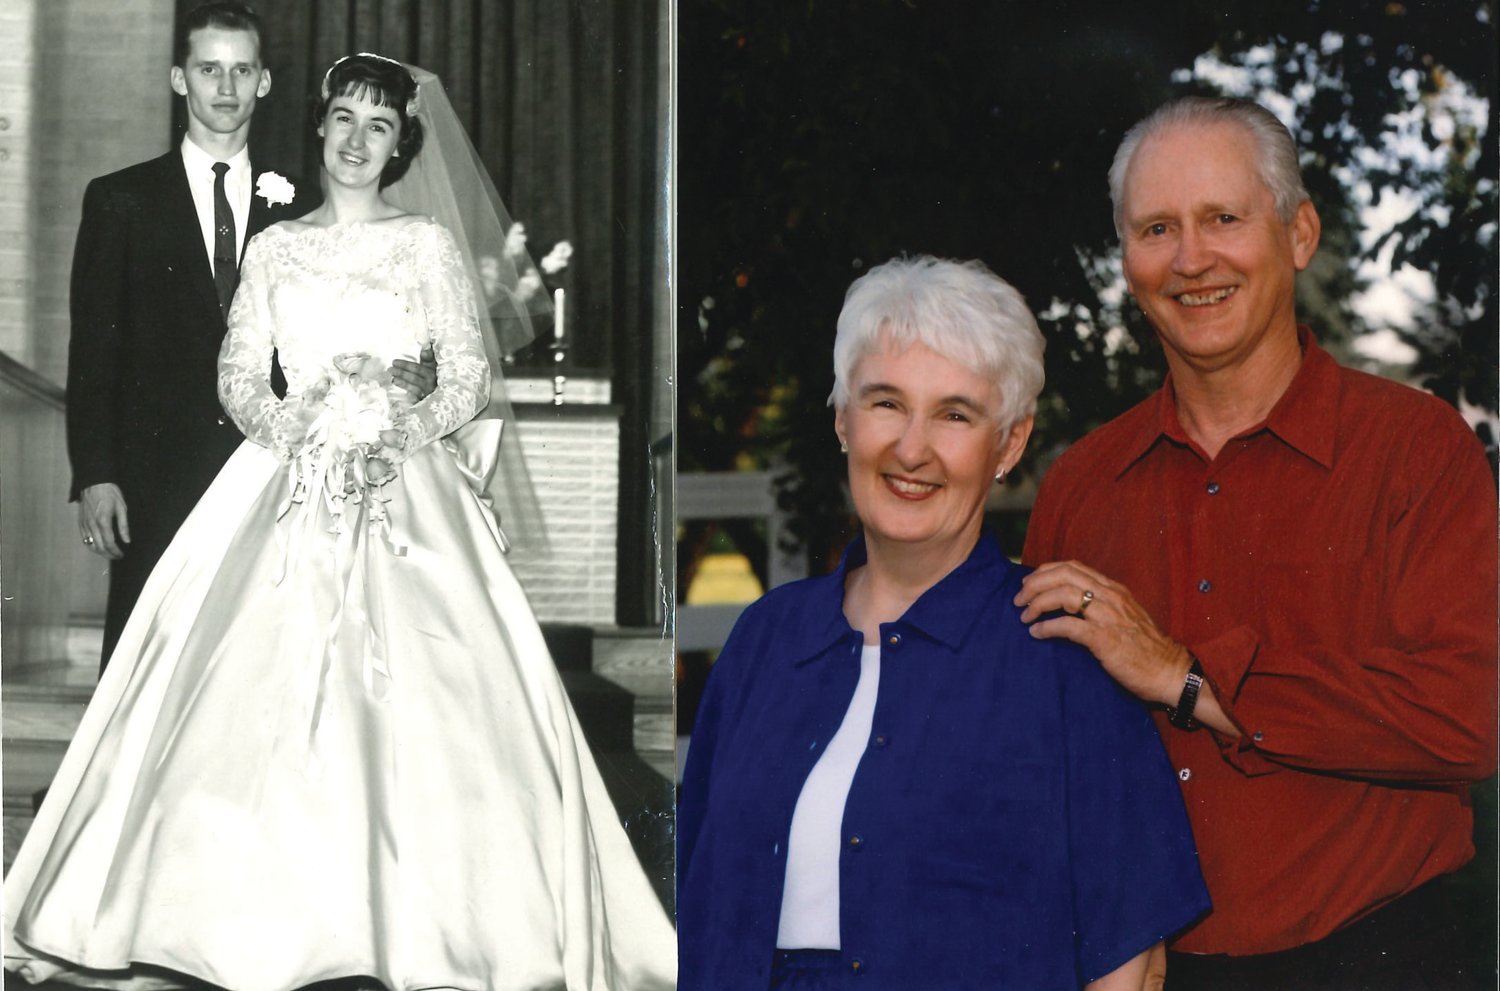 Snoopy (Willis) and Alta Smith met when he was stationed at McChord Air Force Base and she was studying at the University of Puget Sound. He called for her roommate, but when Alta answered the phone, he asked her out because he liked the sound of her voice. They were married in Tacoma on June 3, 1961.